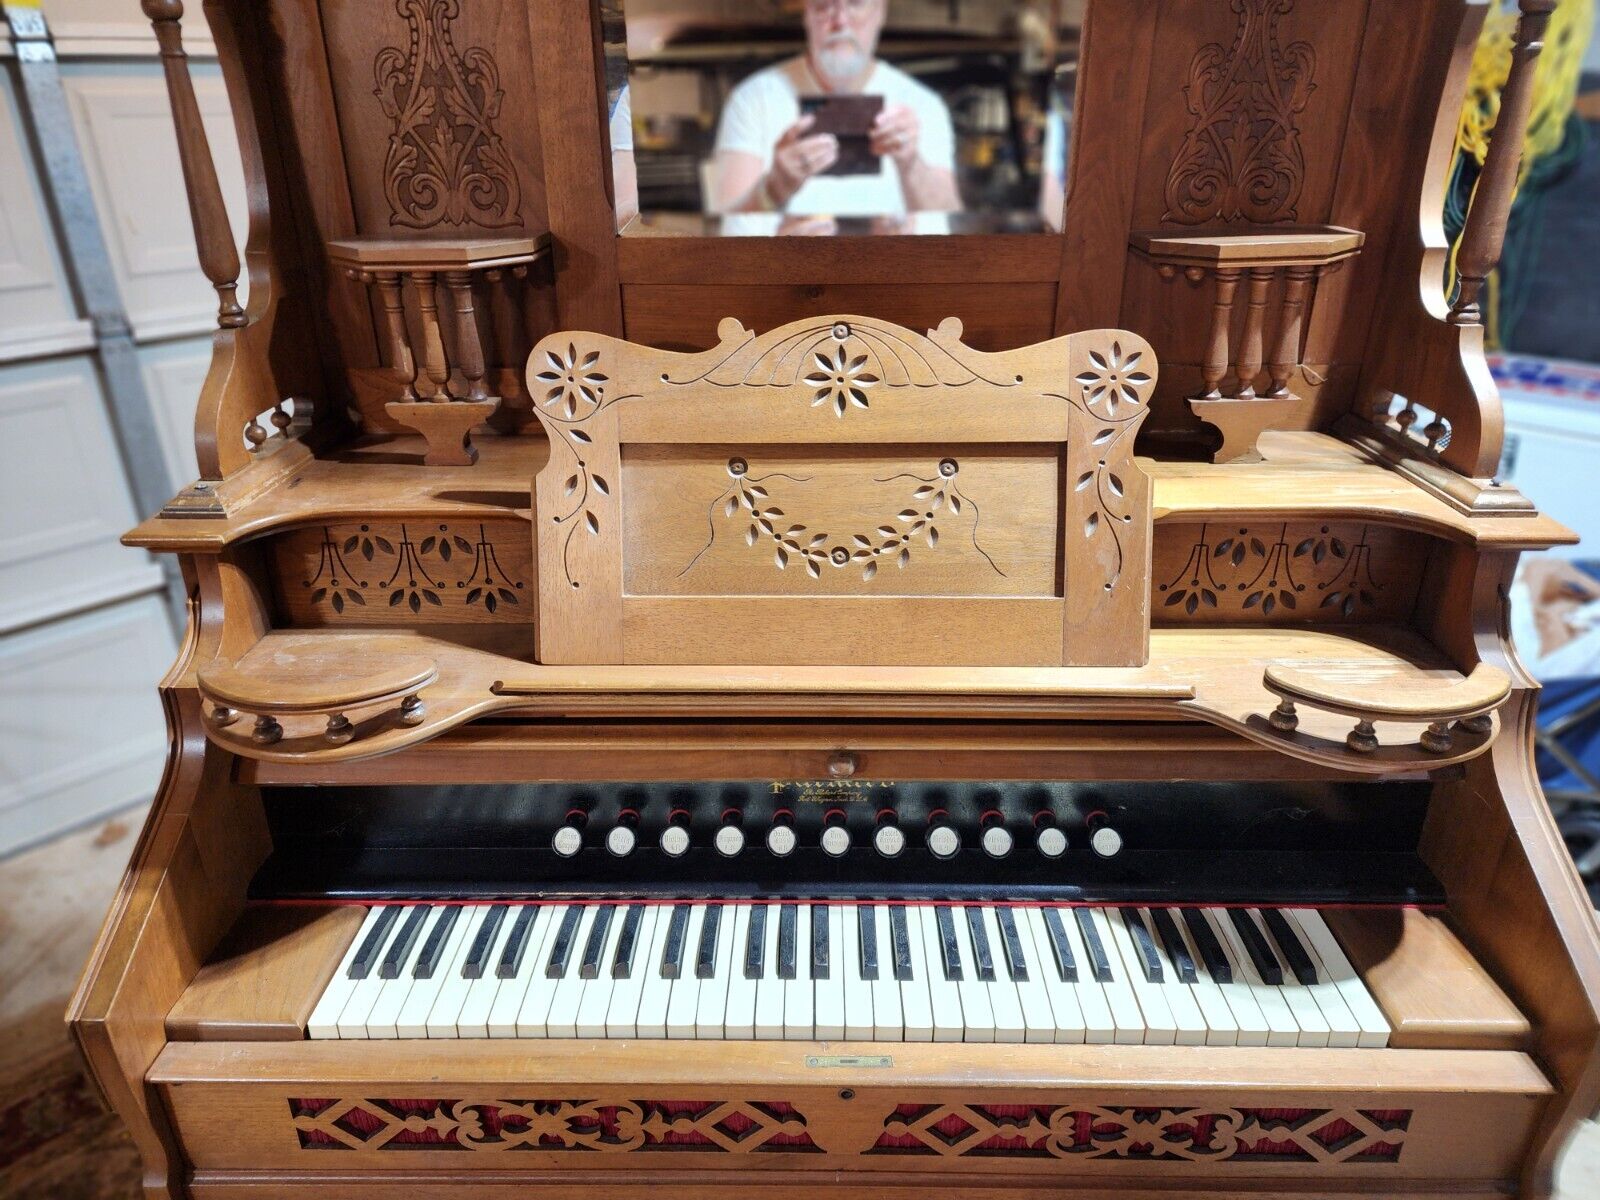 Antique Pump Organ That Works. Play music on it.